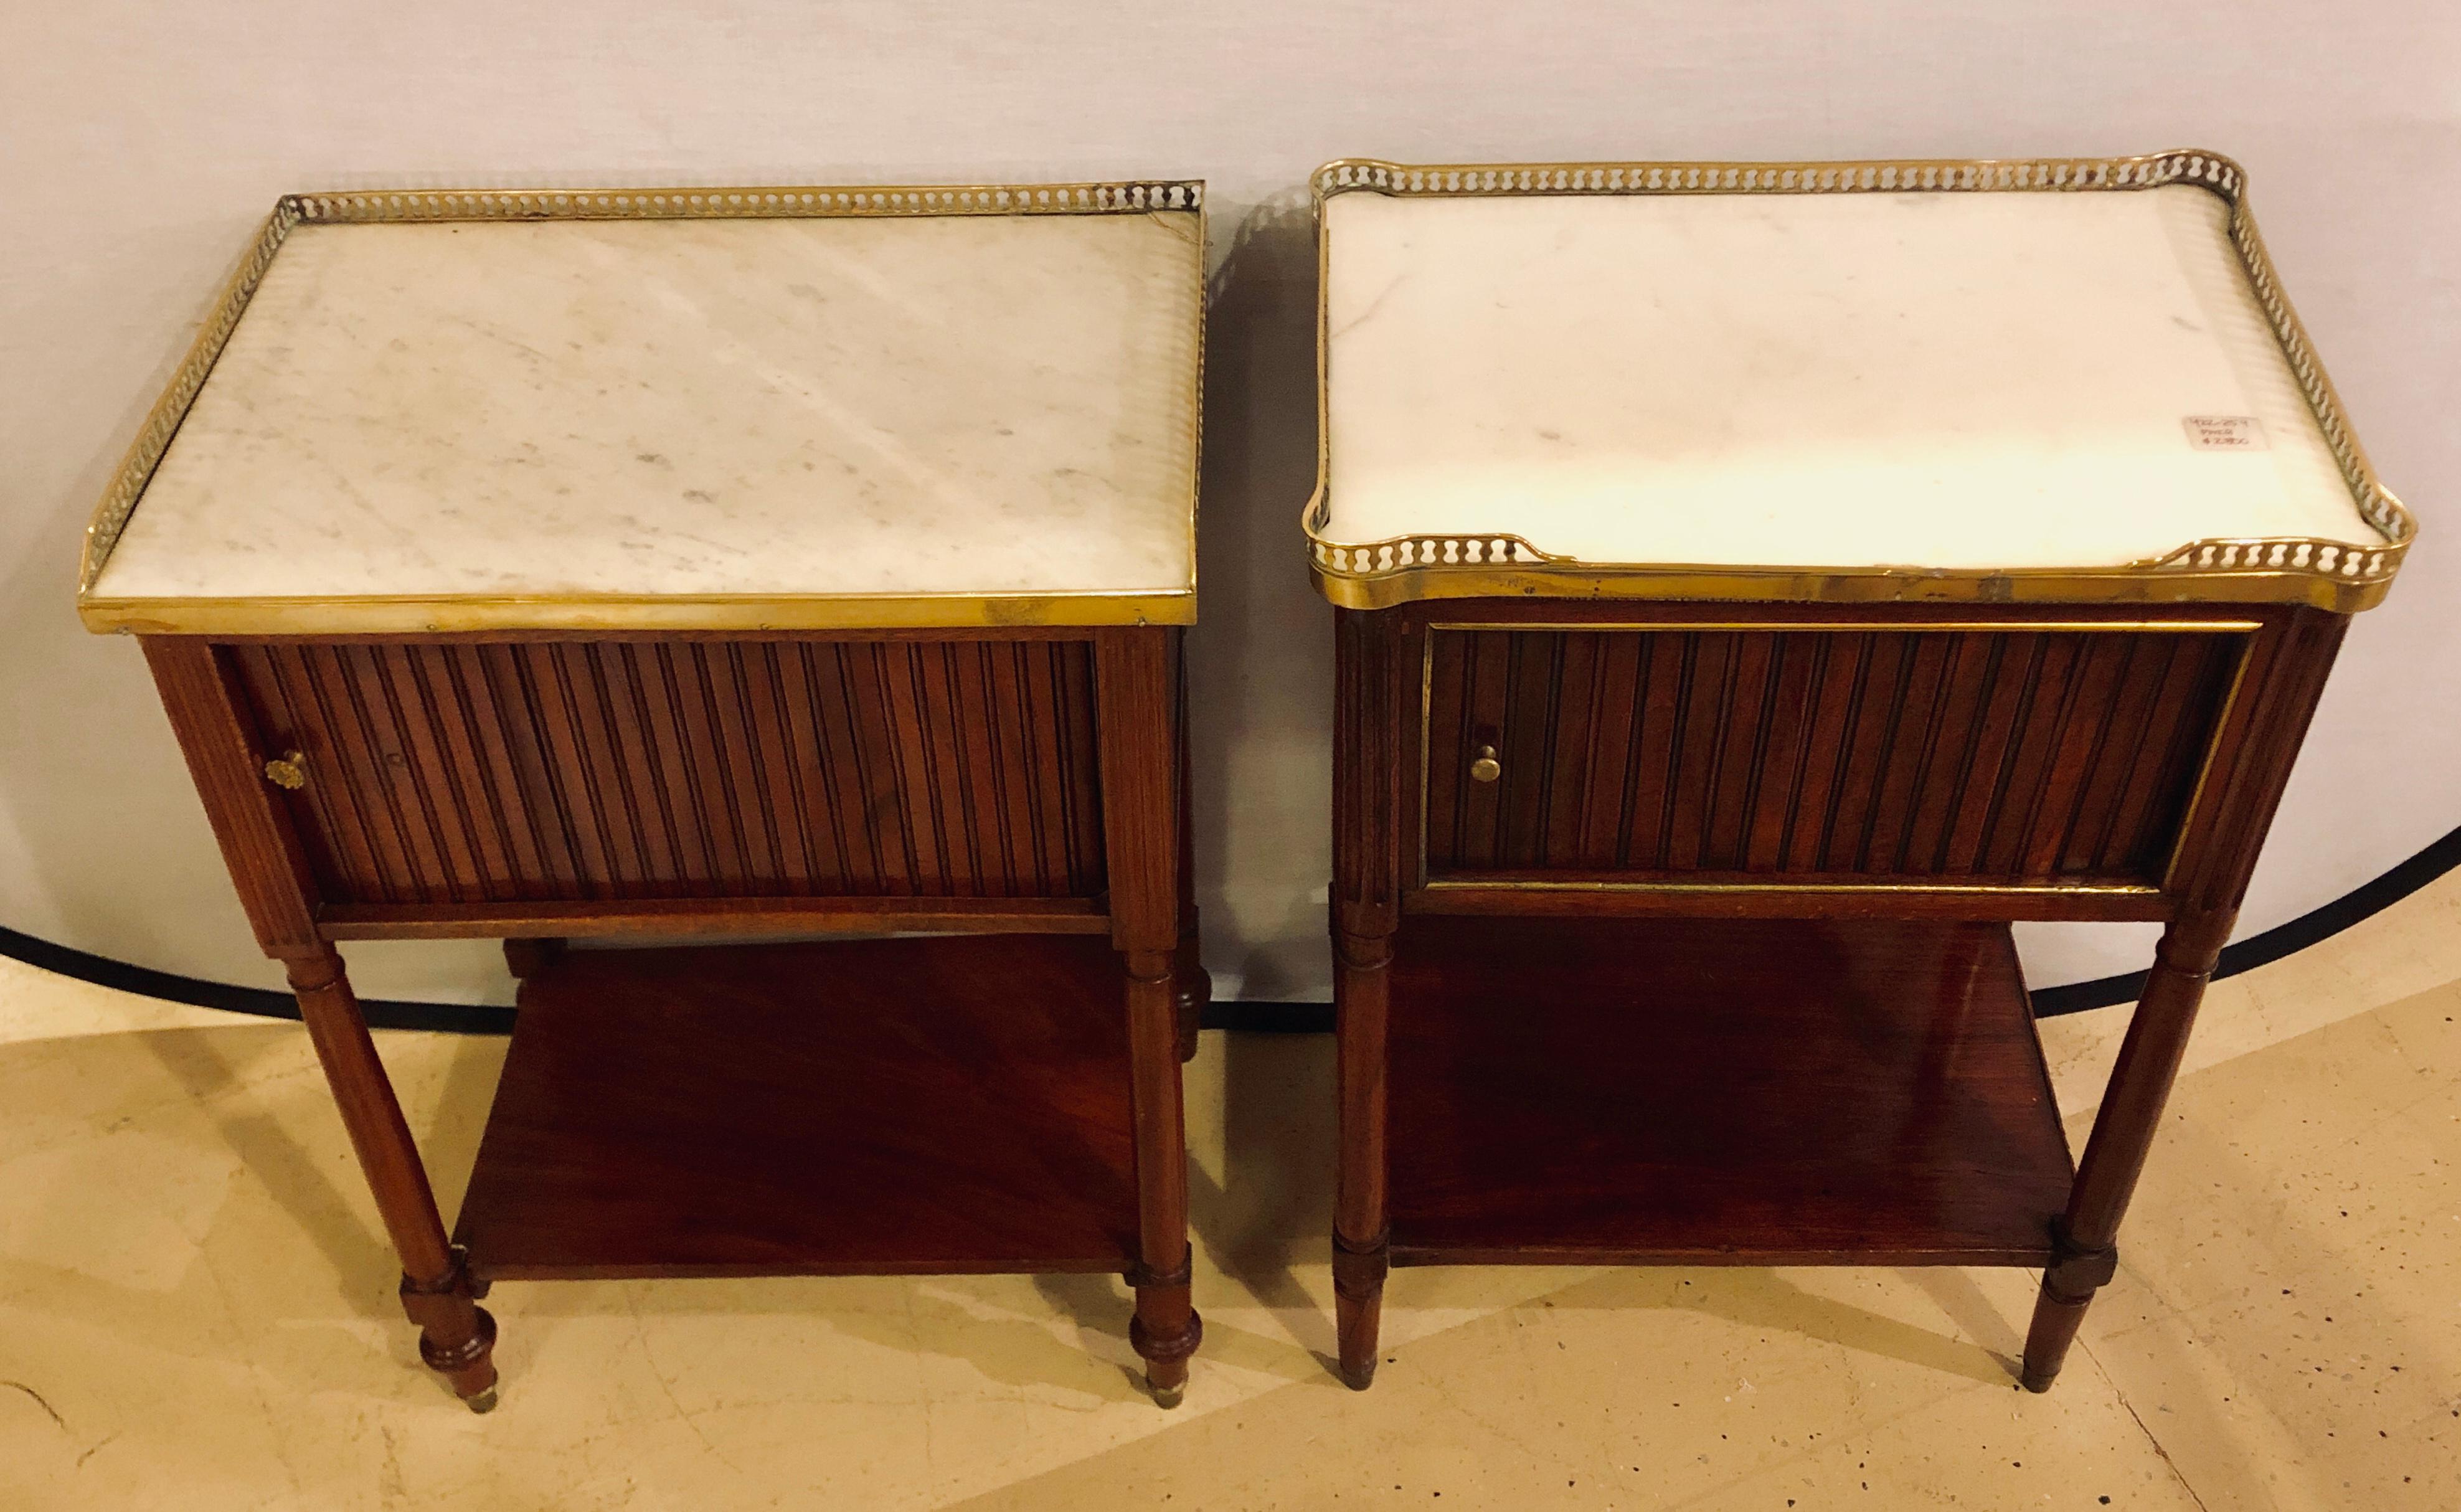 Neoclassical Comparable Pair of Smokers Cabinets Nightstands or Tables Maison Jansen Fashion